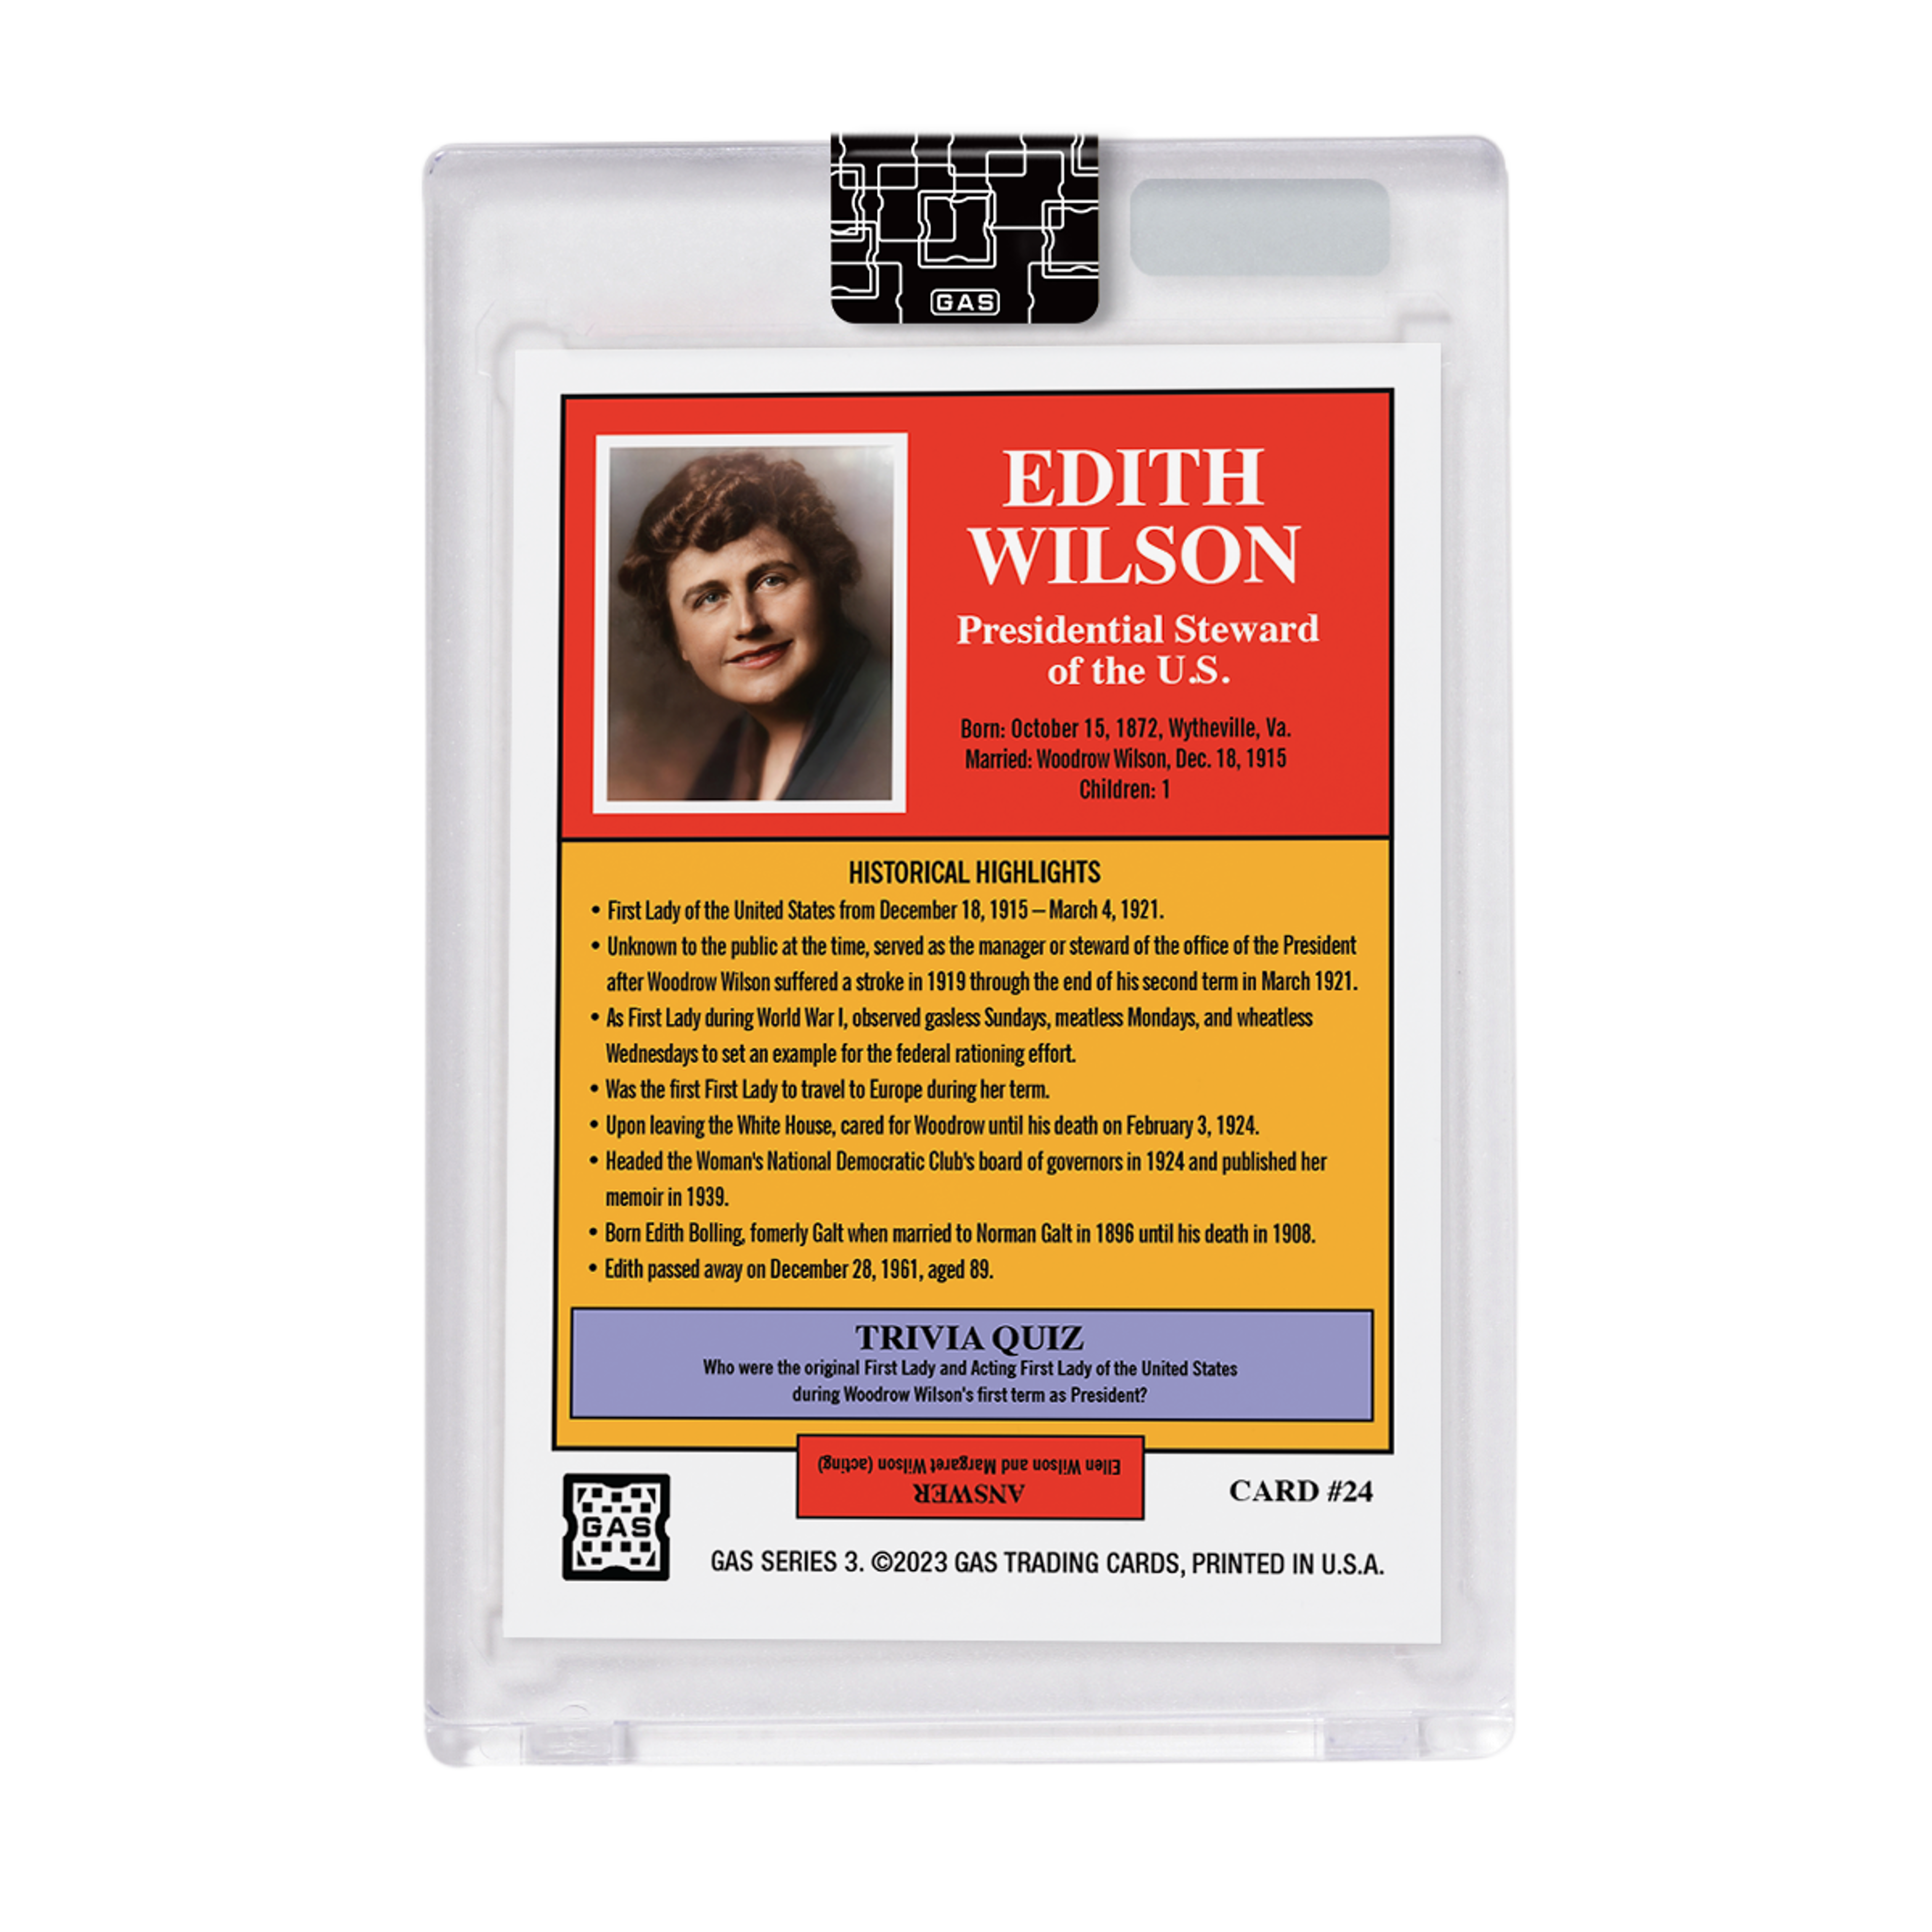 Alternate View 2 of GAS Series 3 #24 Edith Wilson Trading Card #’d to 25